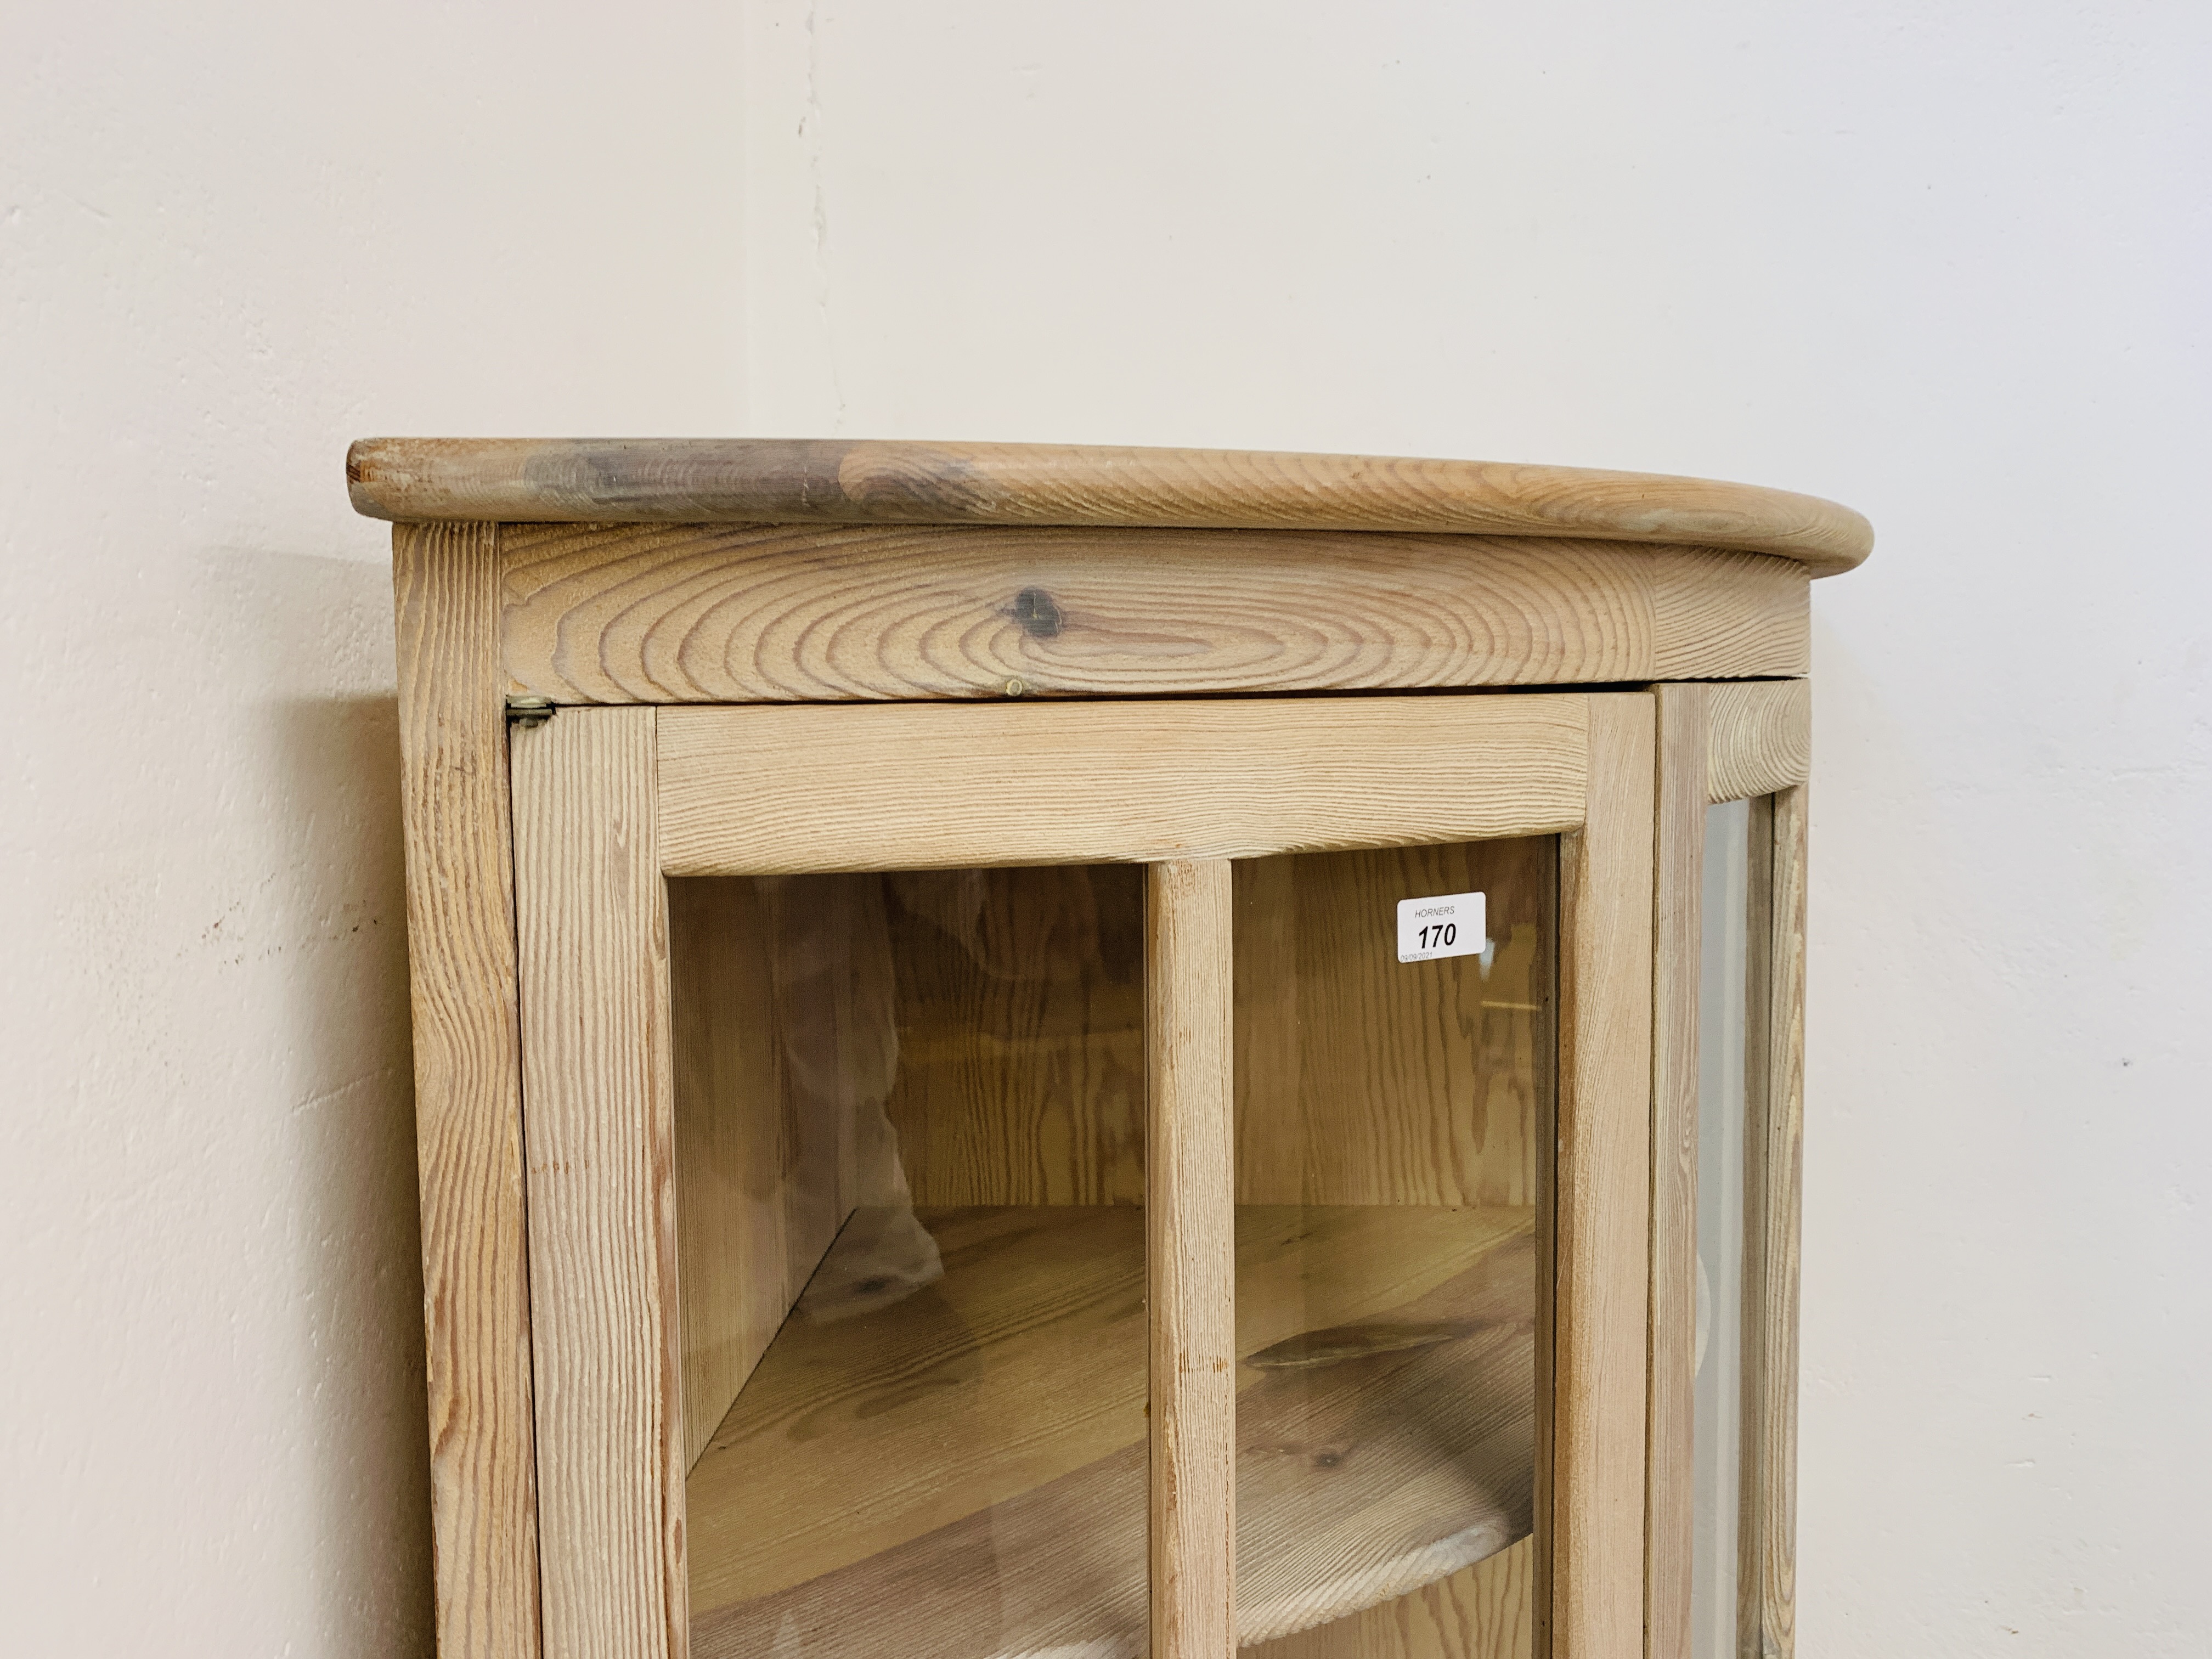 A GOOD QUALITY MODERN LIMED PINE CORNER DISPLAY CABINET MANUFACTURED BY LENO SPAIN - HEIGHT 150CM. - Image 4 of 9